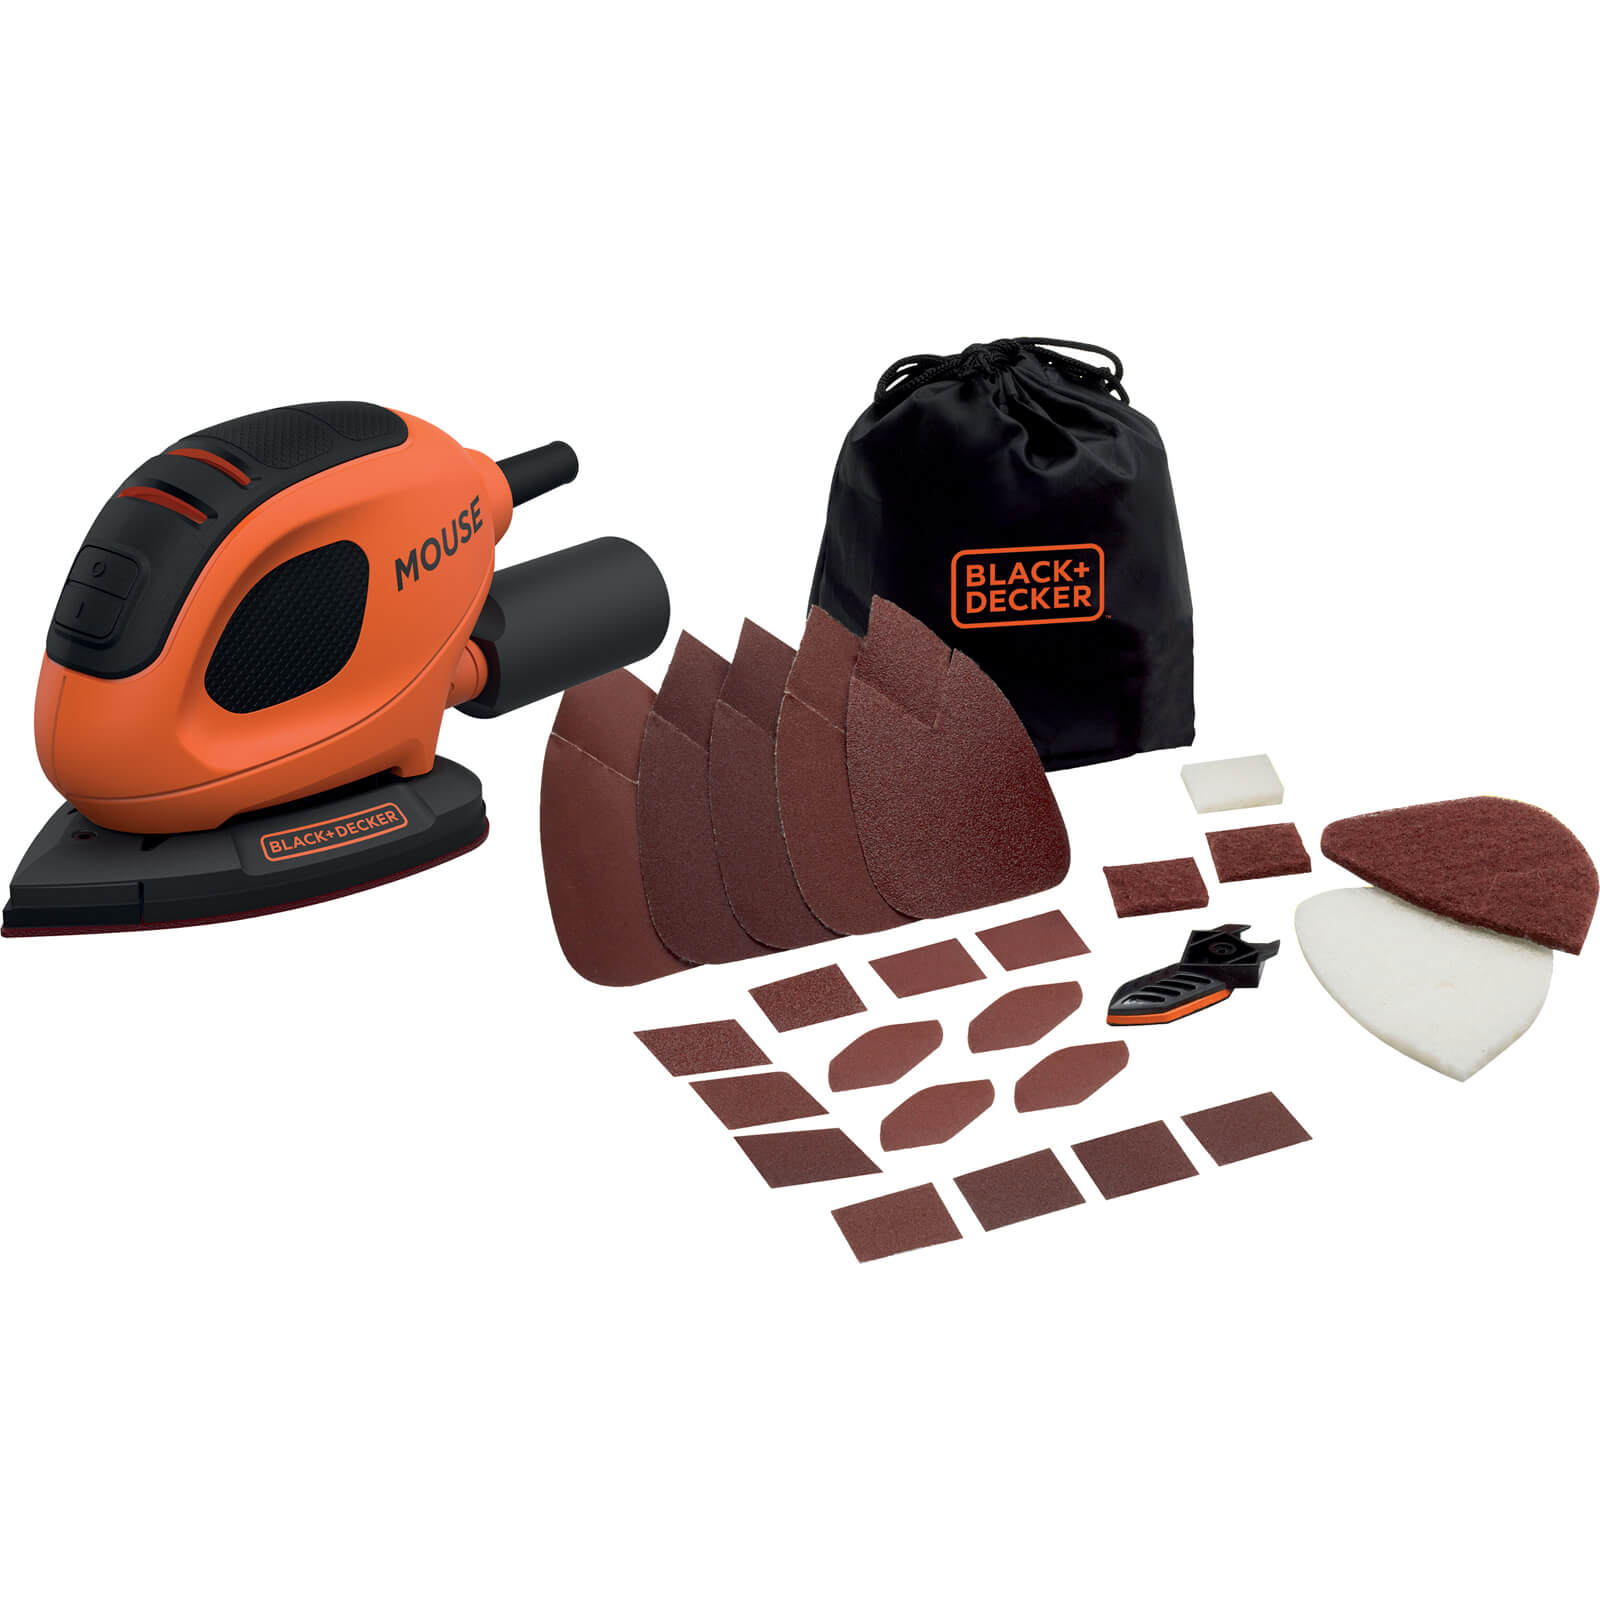 Image of Black and Decker Mouse Sander with Accessories and Bag